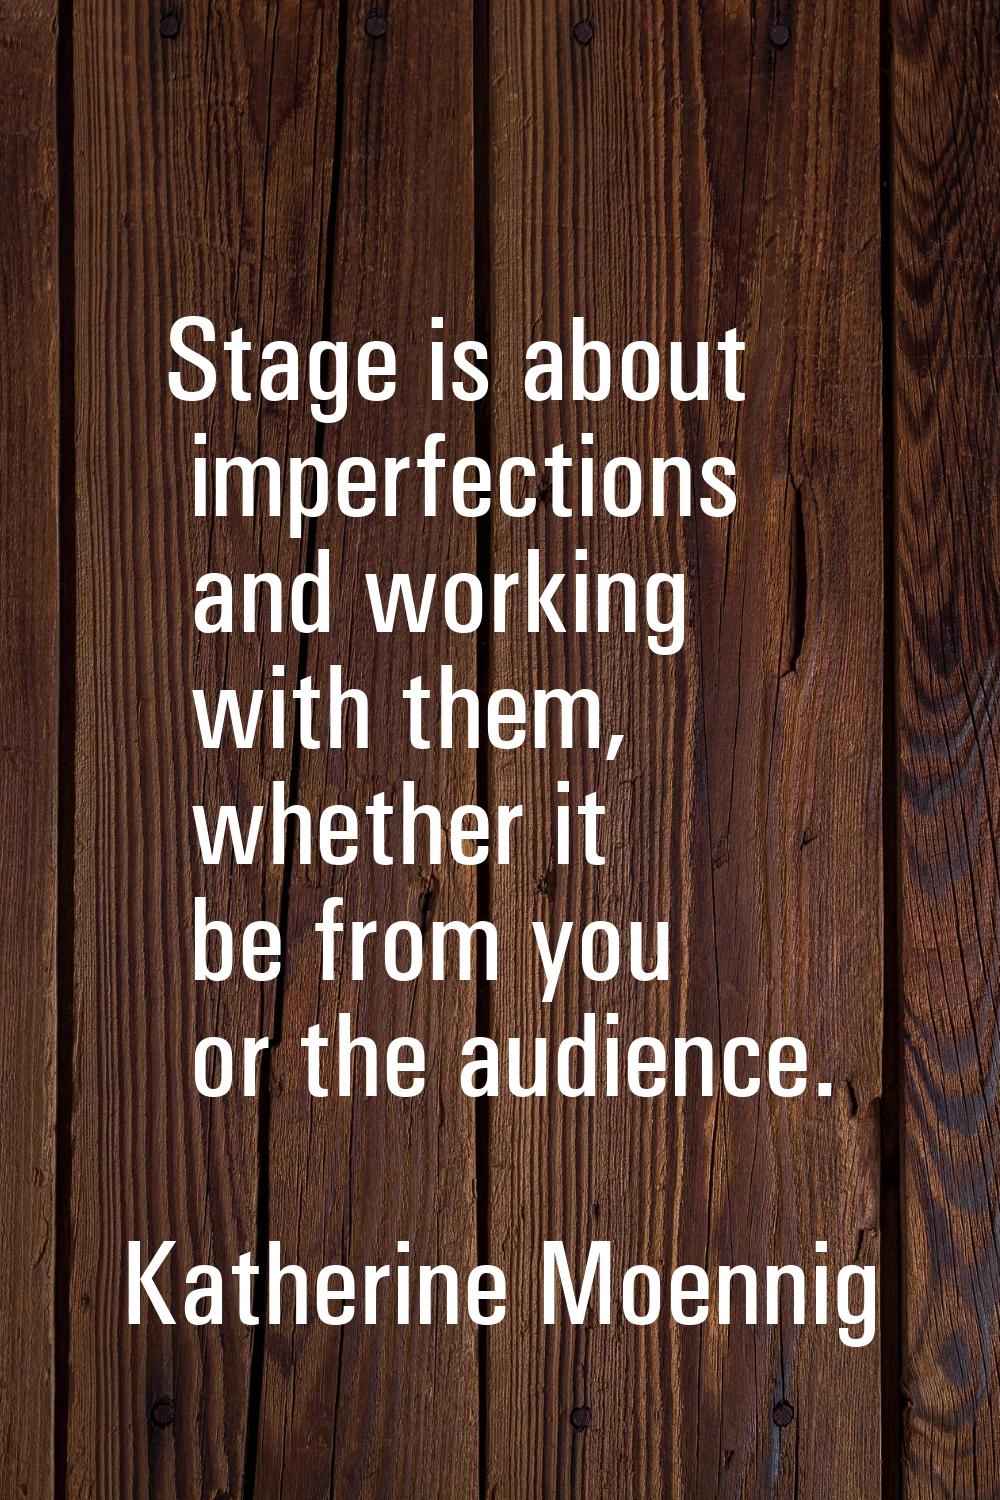 Stage is about imperfections and working with them, whether it be from you or the audience.